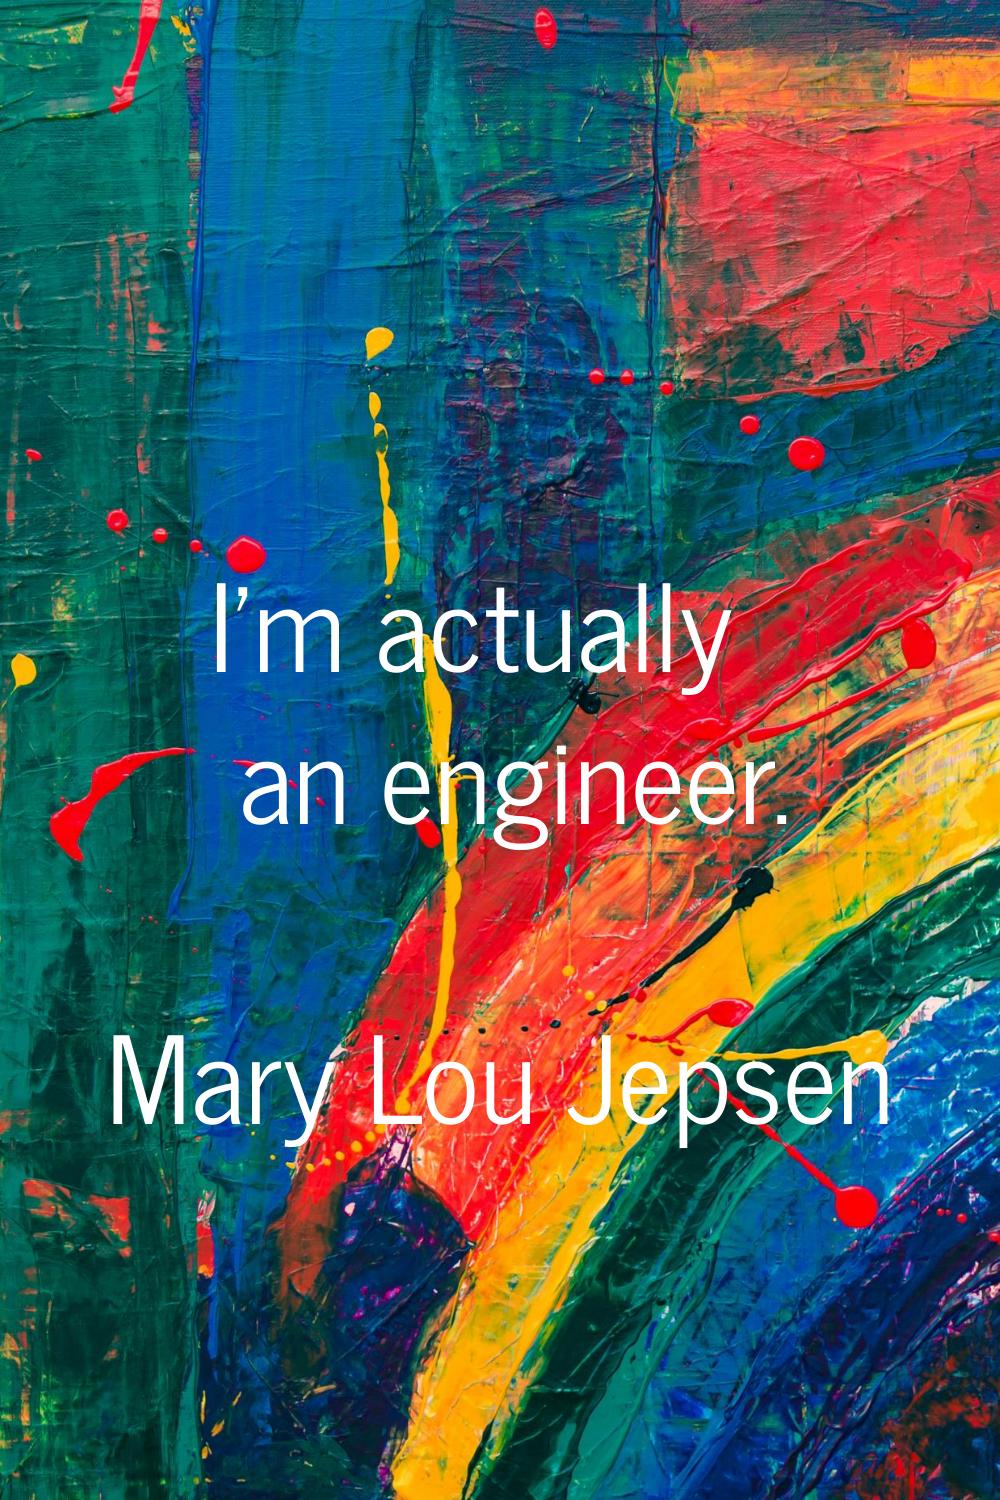 I'm actually an engineer.